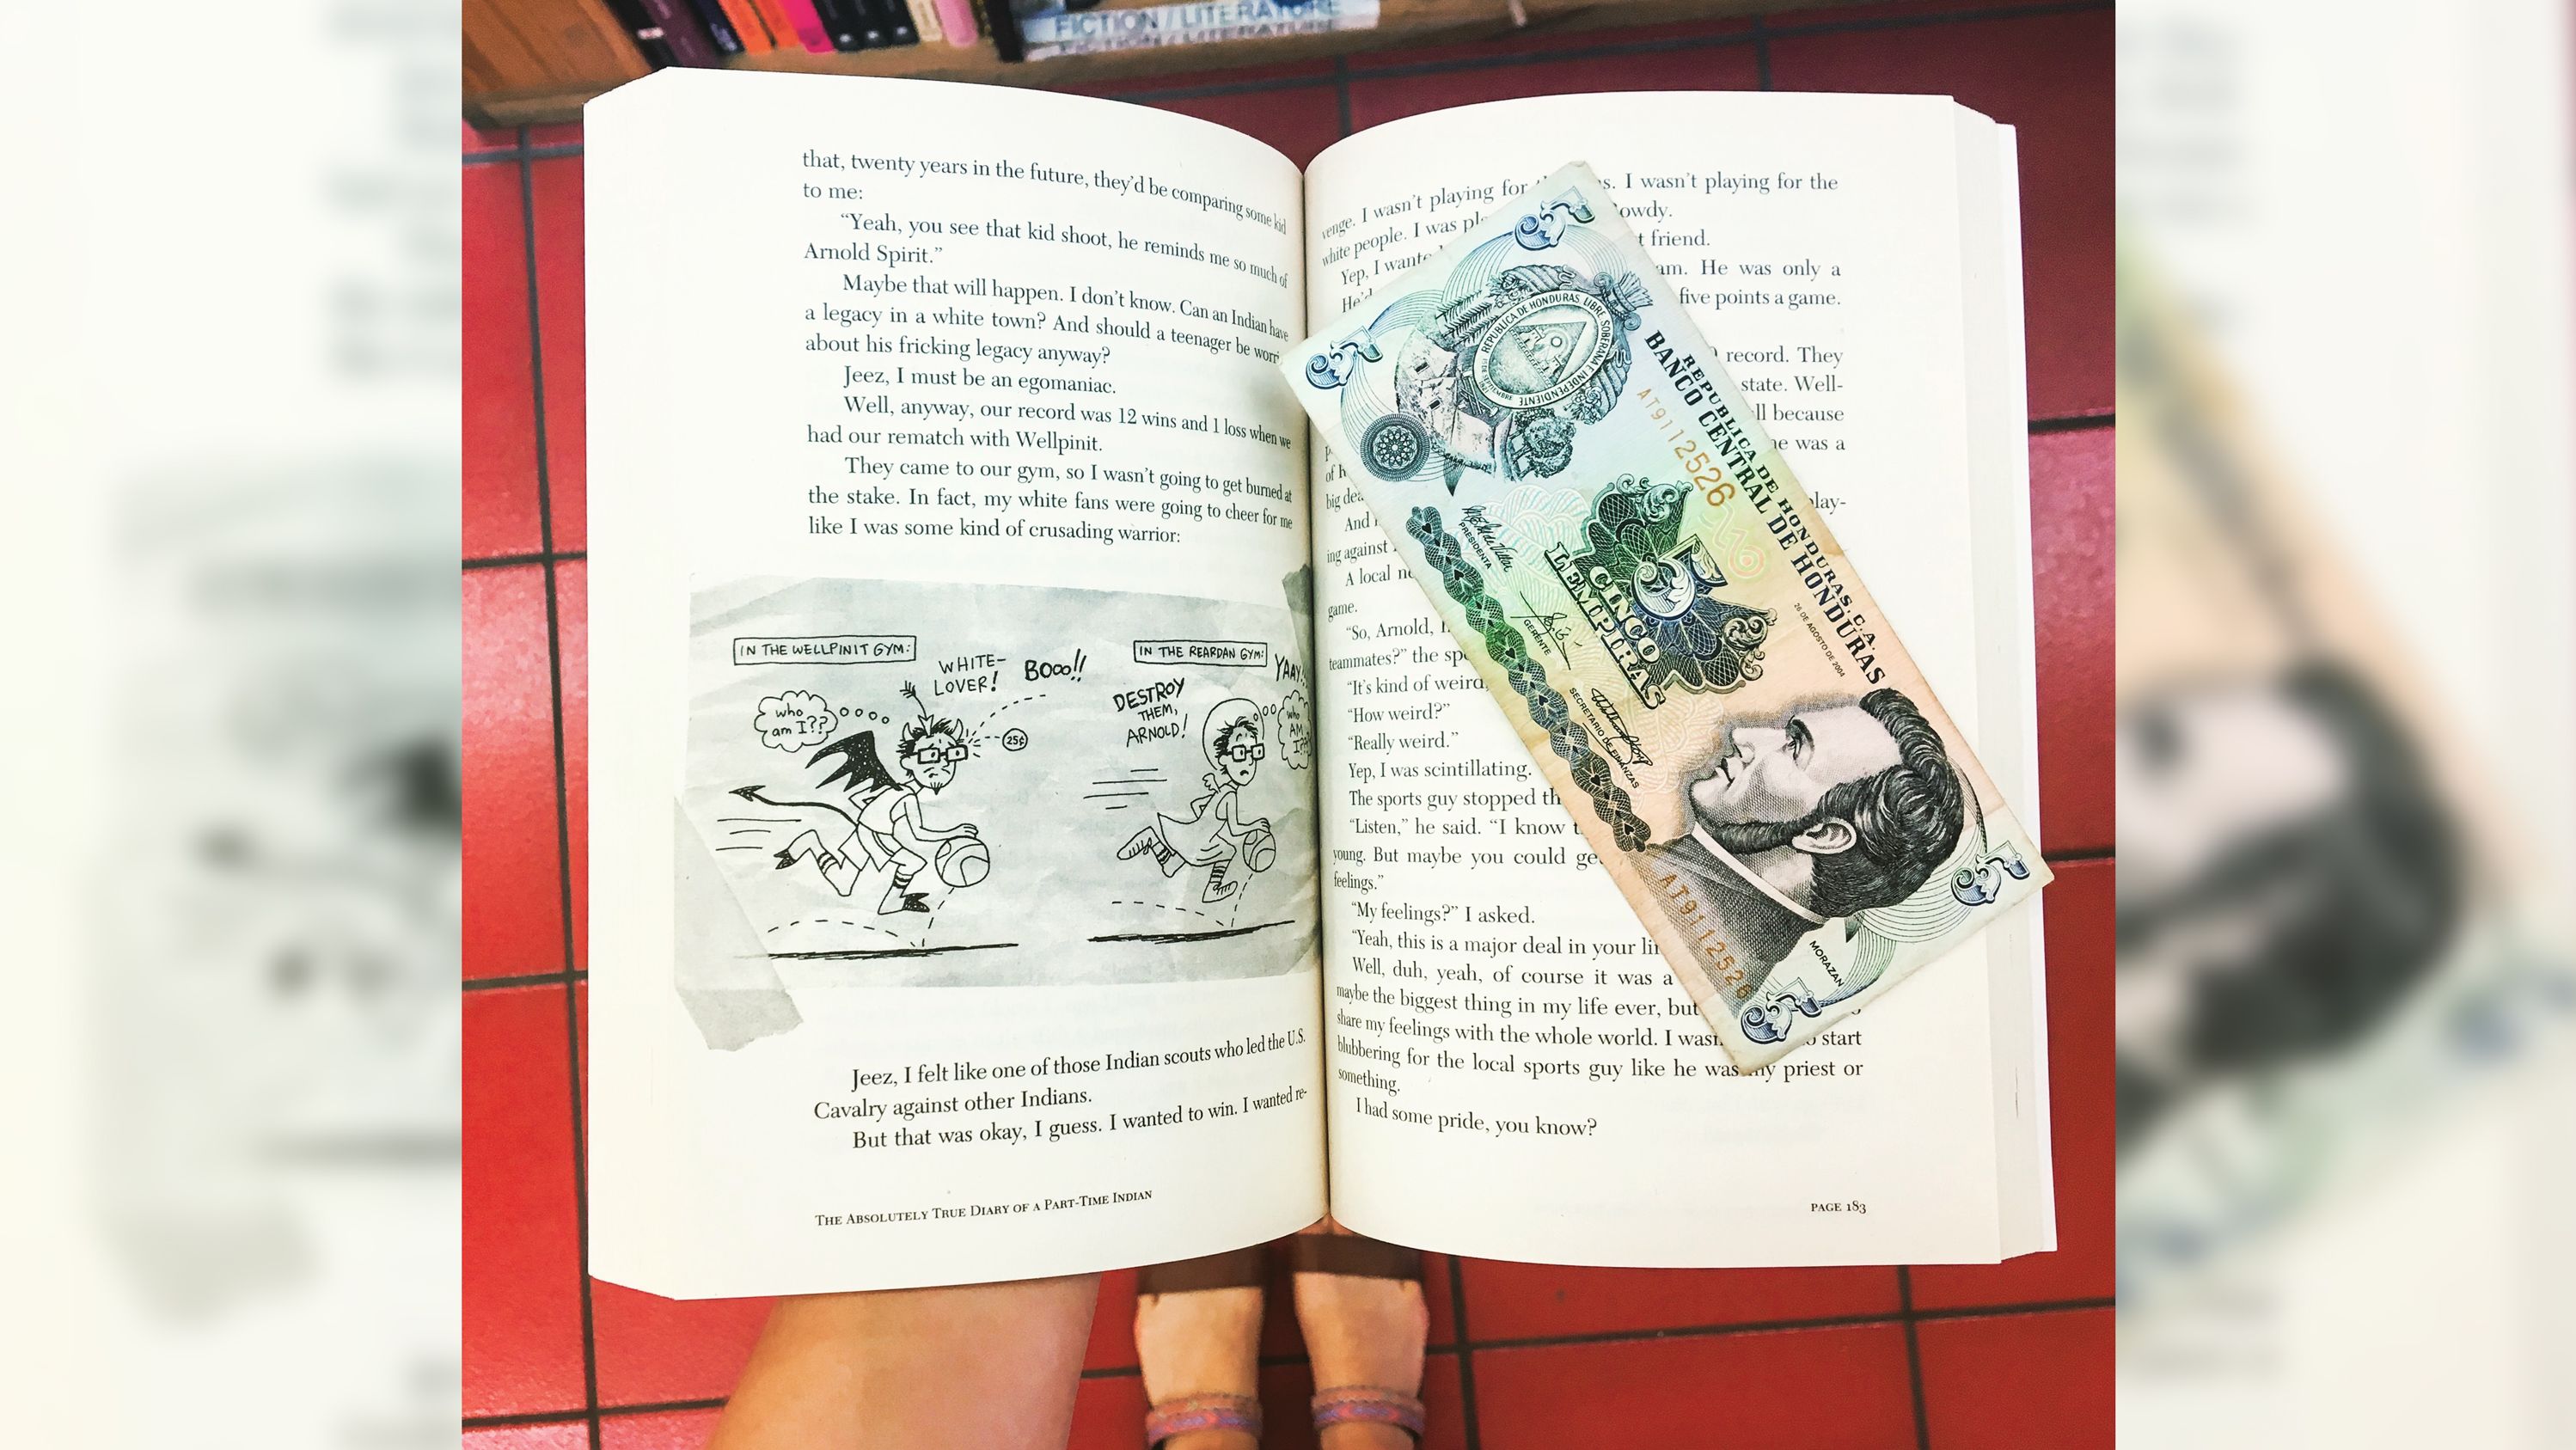 This banknote from Honduras was found in Sherman Alexie's "The Absolutely True Story of a Part-Time Indian." Smreker said she has found currency and receipts from around the world that previous readers used as makeshift bookmarks. 